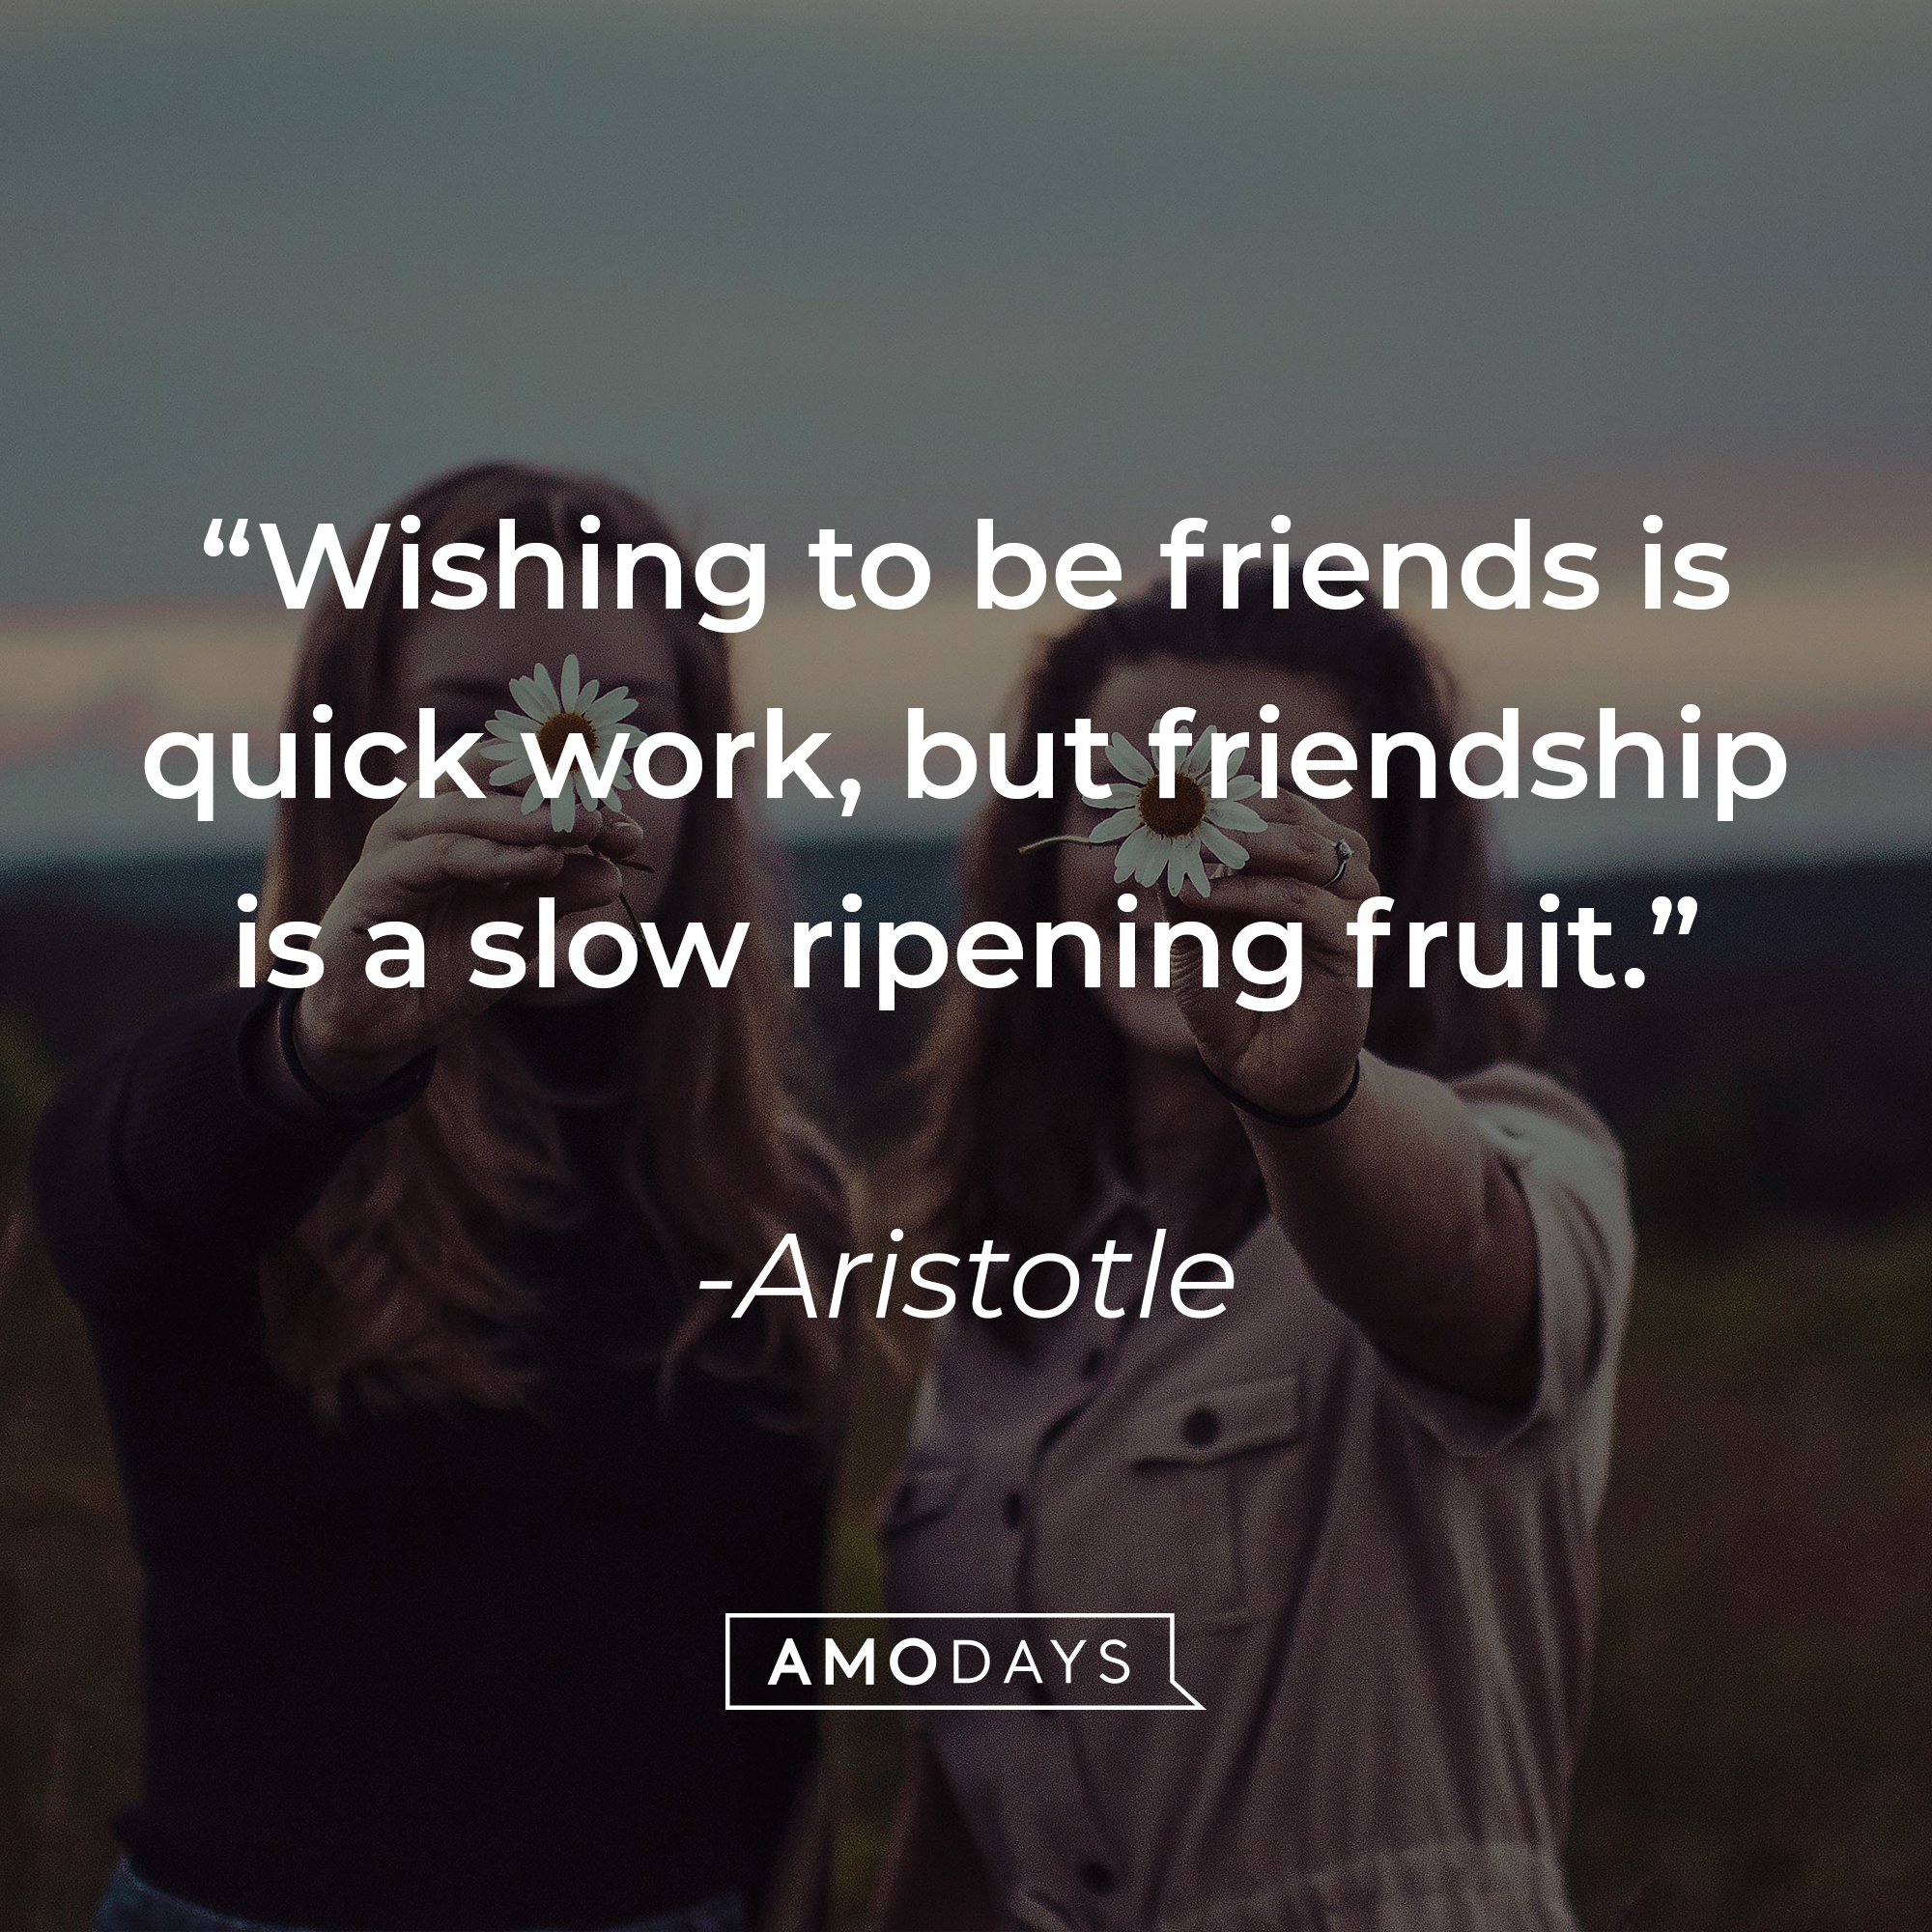 Aristotle's quote: "Wishing to be friends is quick work, but friendship is a slow ripening fruit." | Source: Unsplash